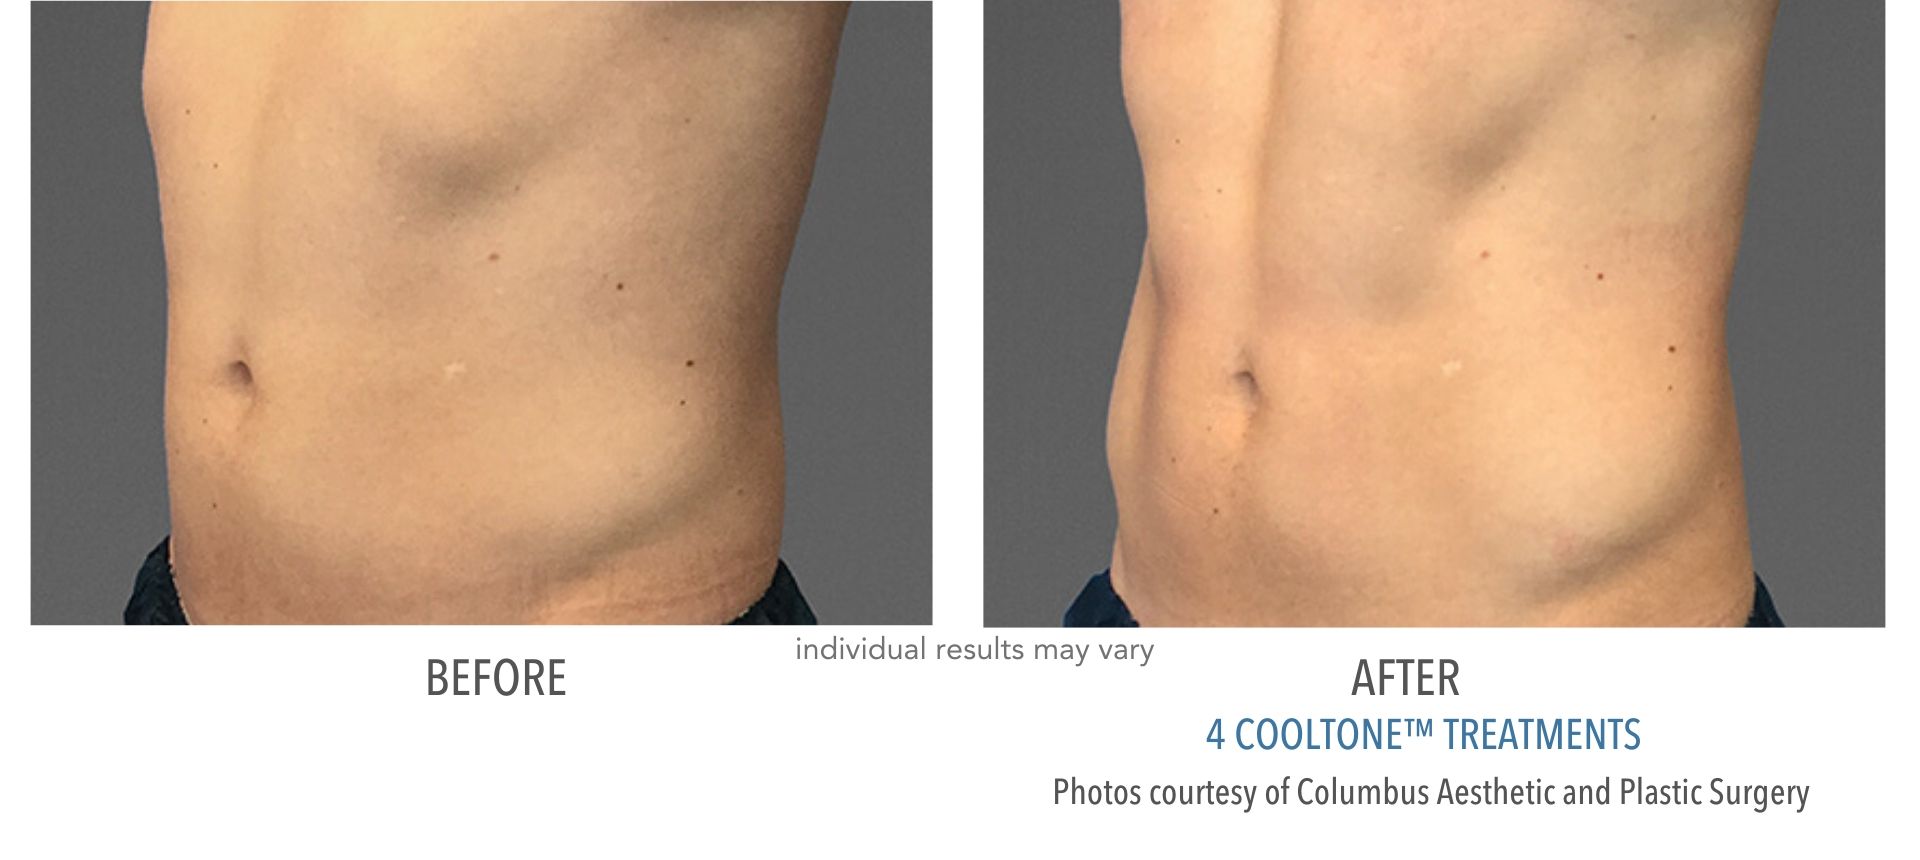 Cooltone results of male's stomach before and after at Laser + Skin Institute in Chatham, New Jersey.